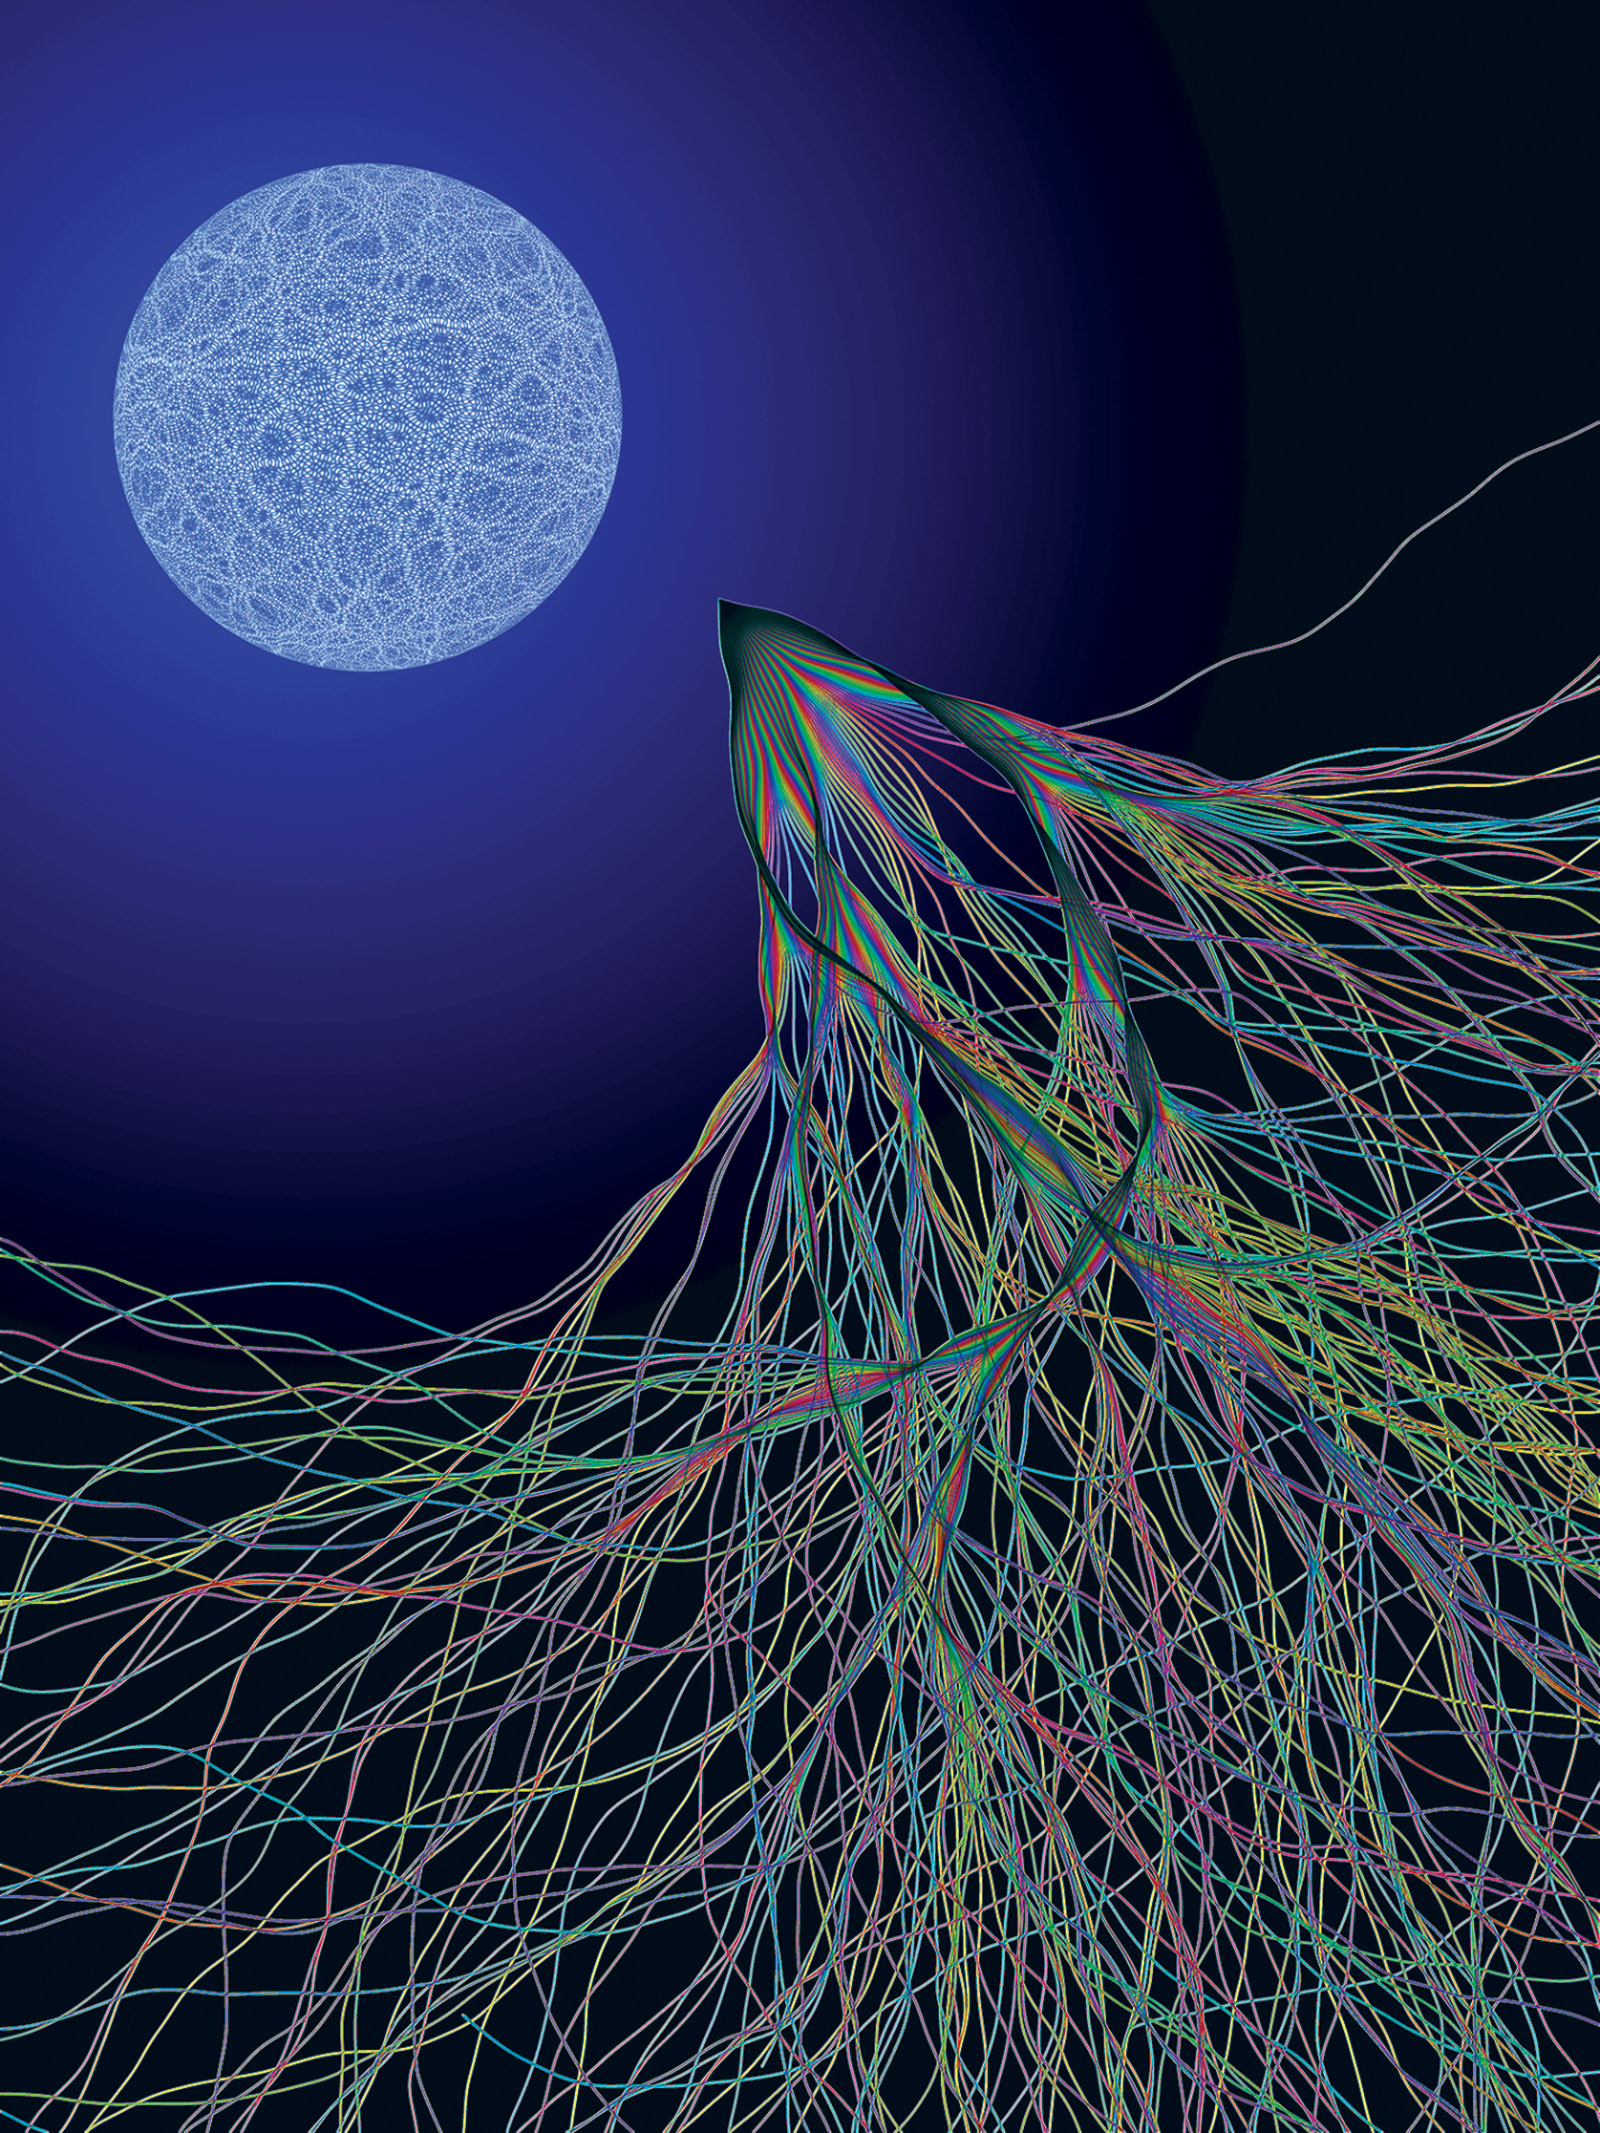 The physicist Eric J. Heller’s Transport XIII (2003), inspired by electron flow experiments conducted at Harvard. According to Heller, the image ‘shows two kinds of chaos: a random quantum wave on the surface of a sphere, and chaotic classical electron paths in a semiconductor launched over a range of angles from a particular point. Even though one is quantum mechanical and the other classical, they are related: the chaotic classical paths cause random quantum waves to appear when the classical system is solved quantum mechanically.’